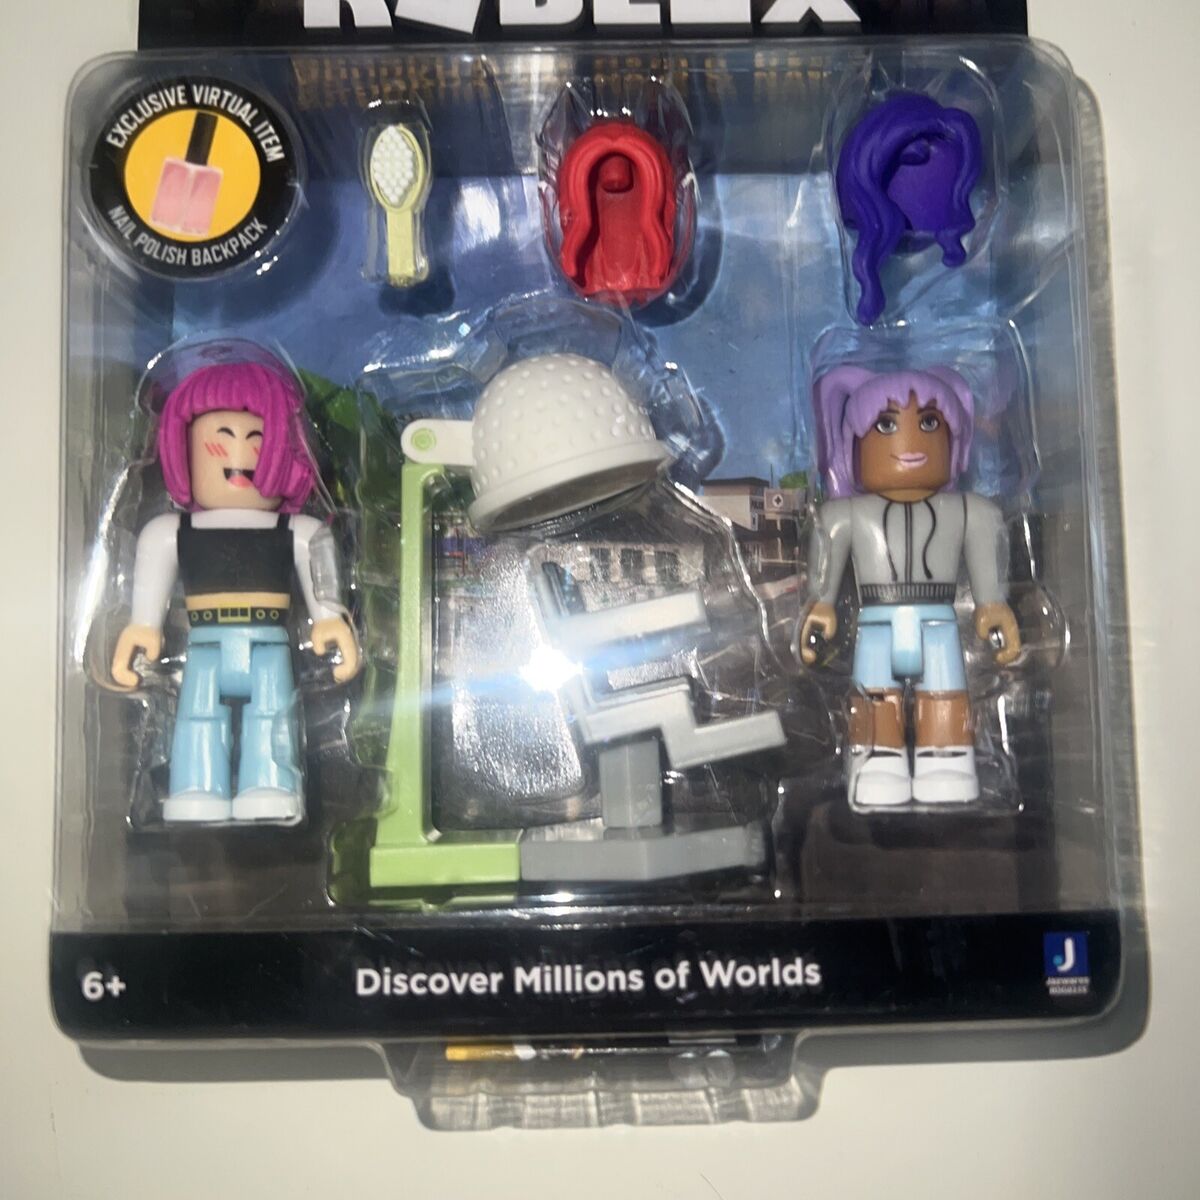 Roblox Collection Brookhaven Hair & Nails 3 Action Figures w/ Virtual Item  New